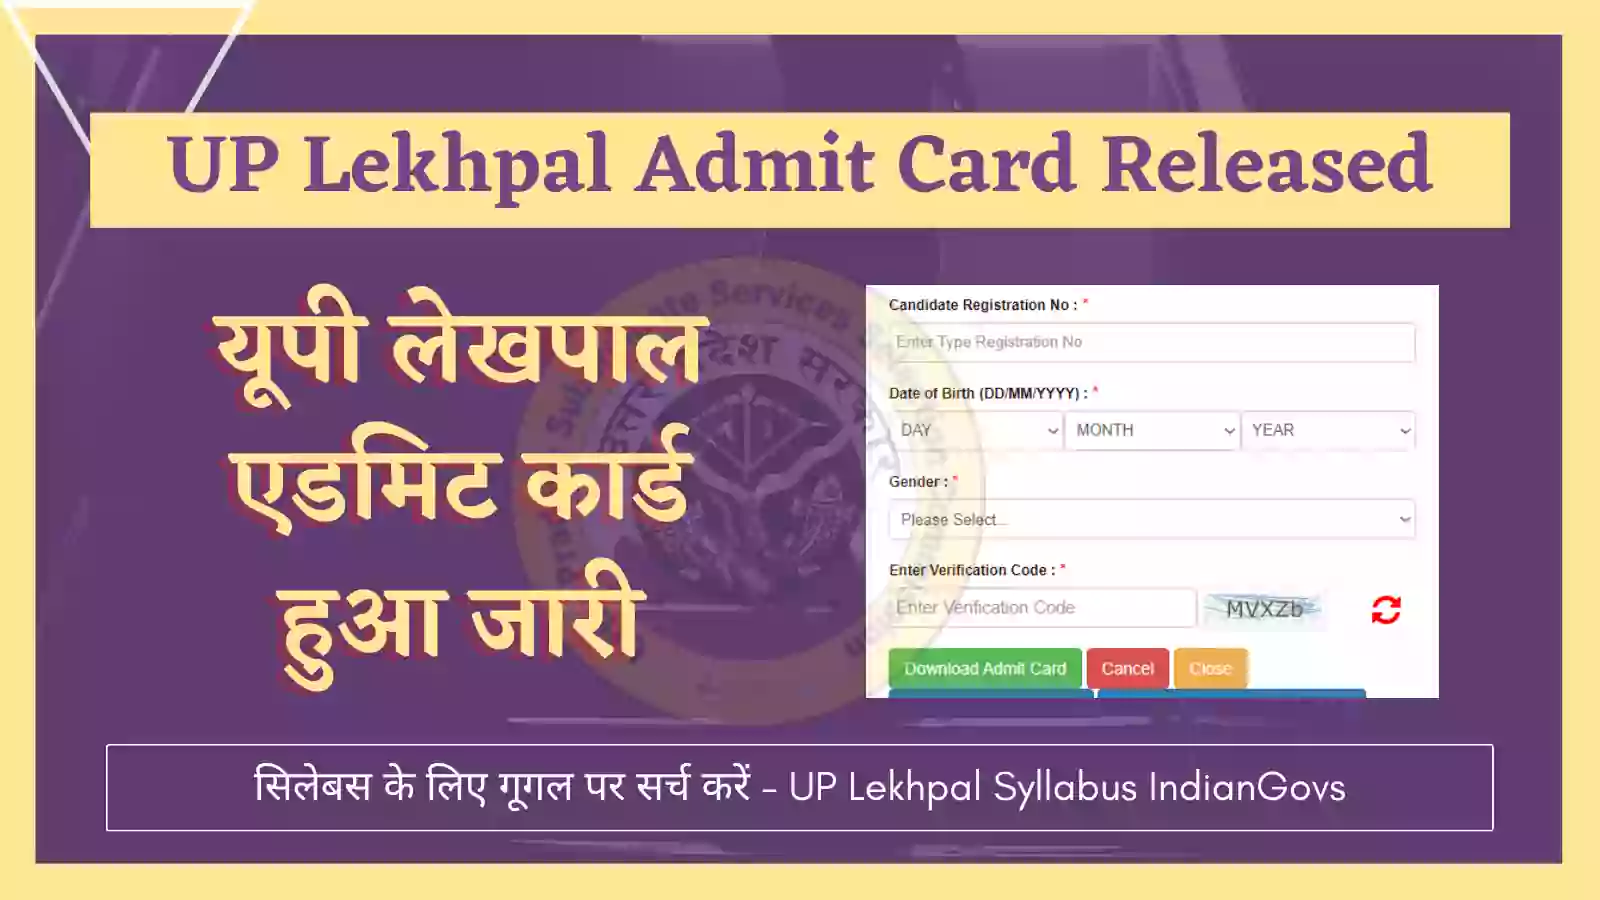 up lekhpal admit card download